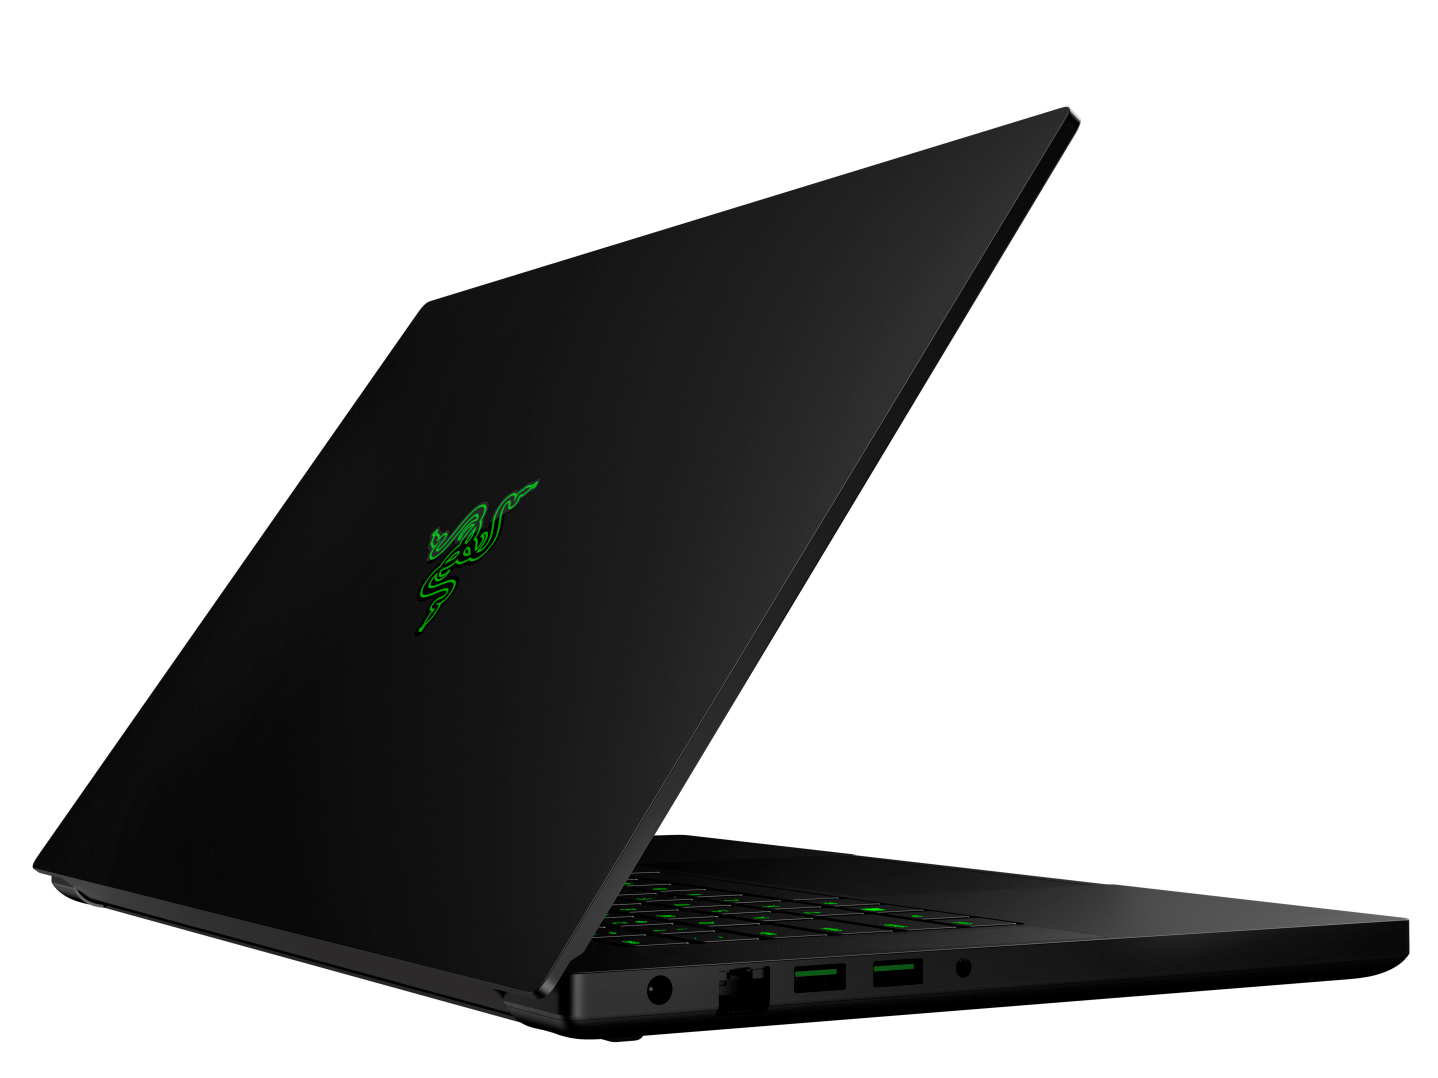 The best gaming laptops money can buy